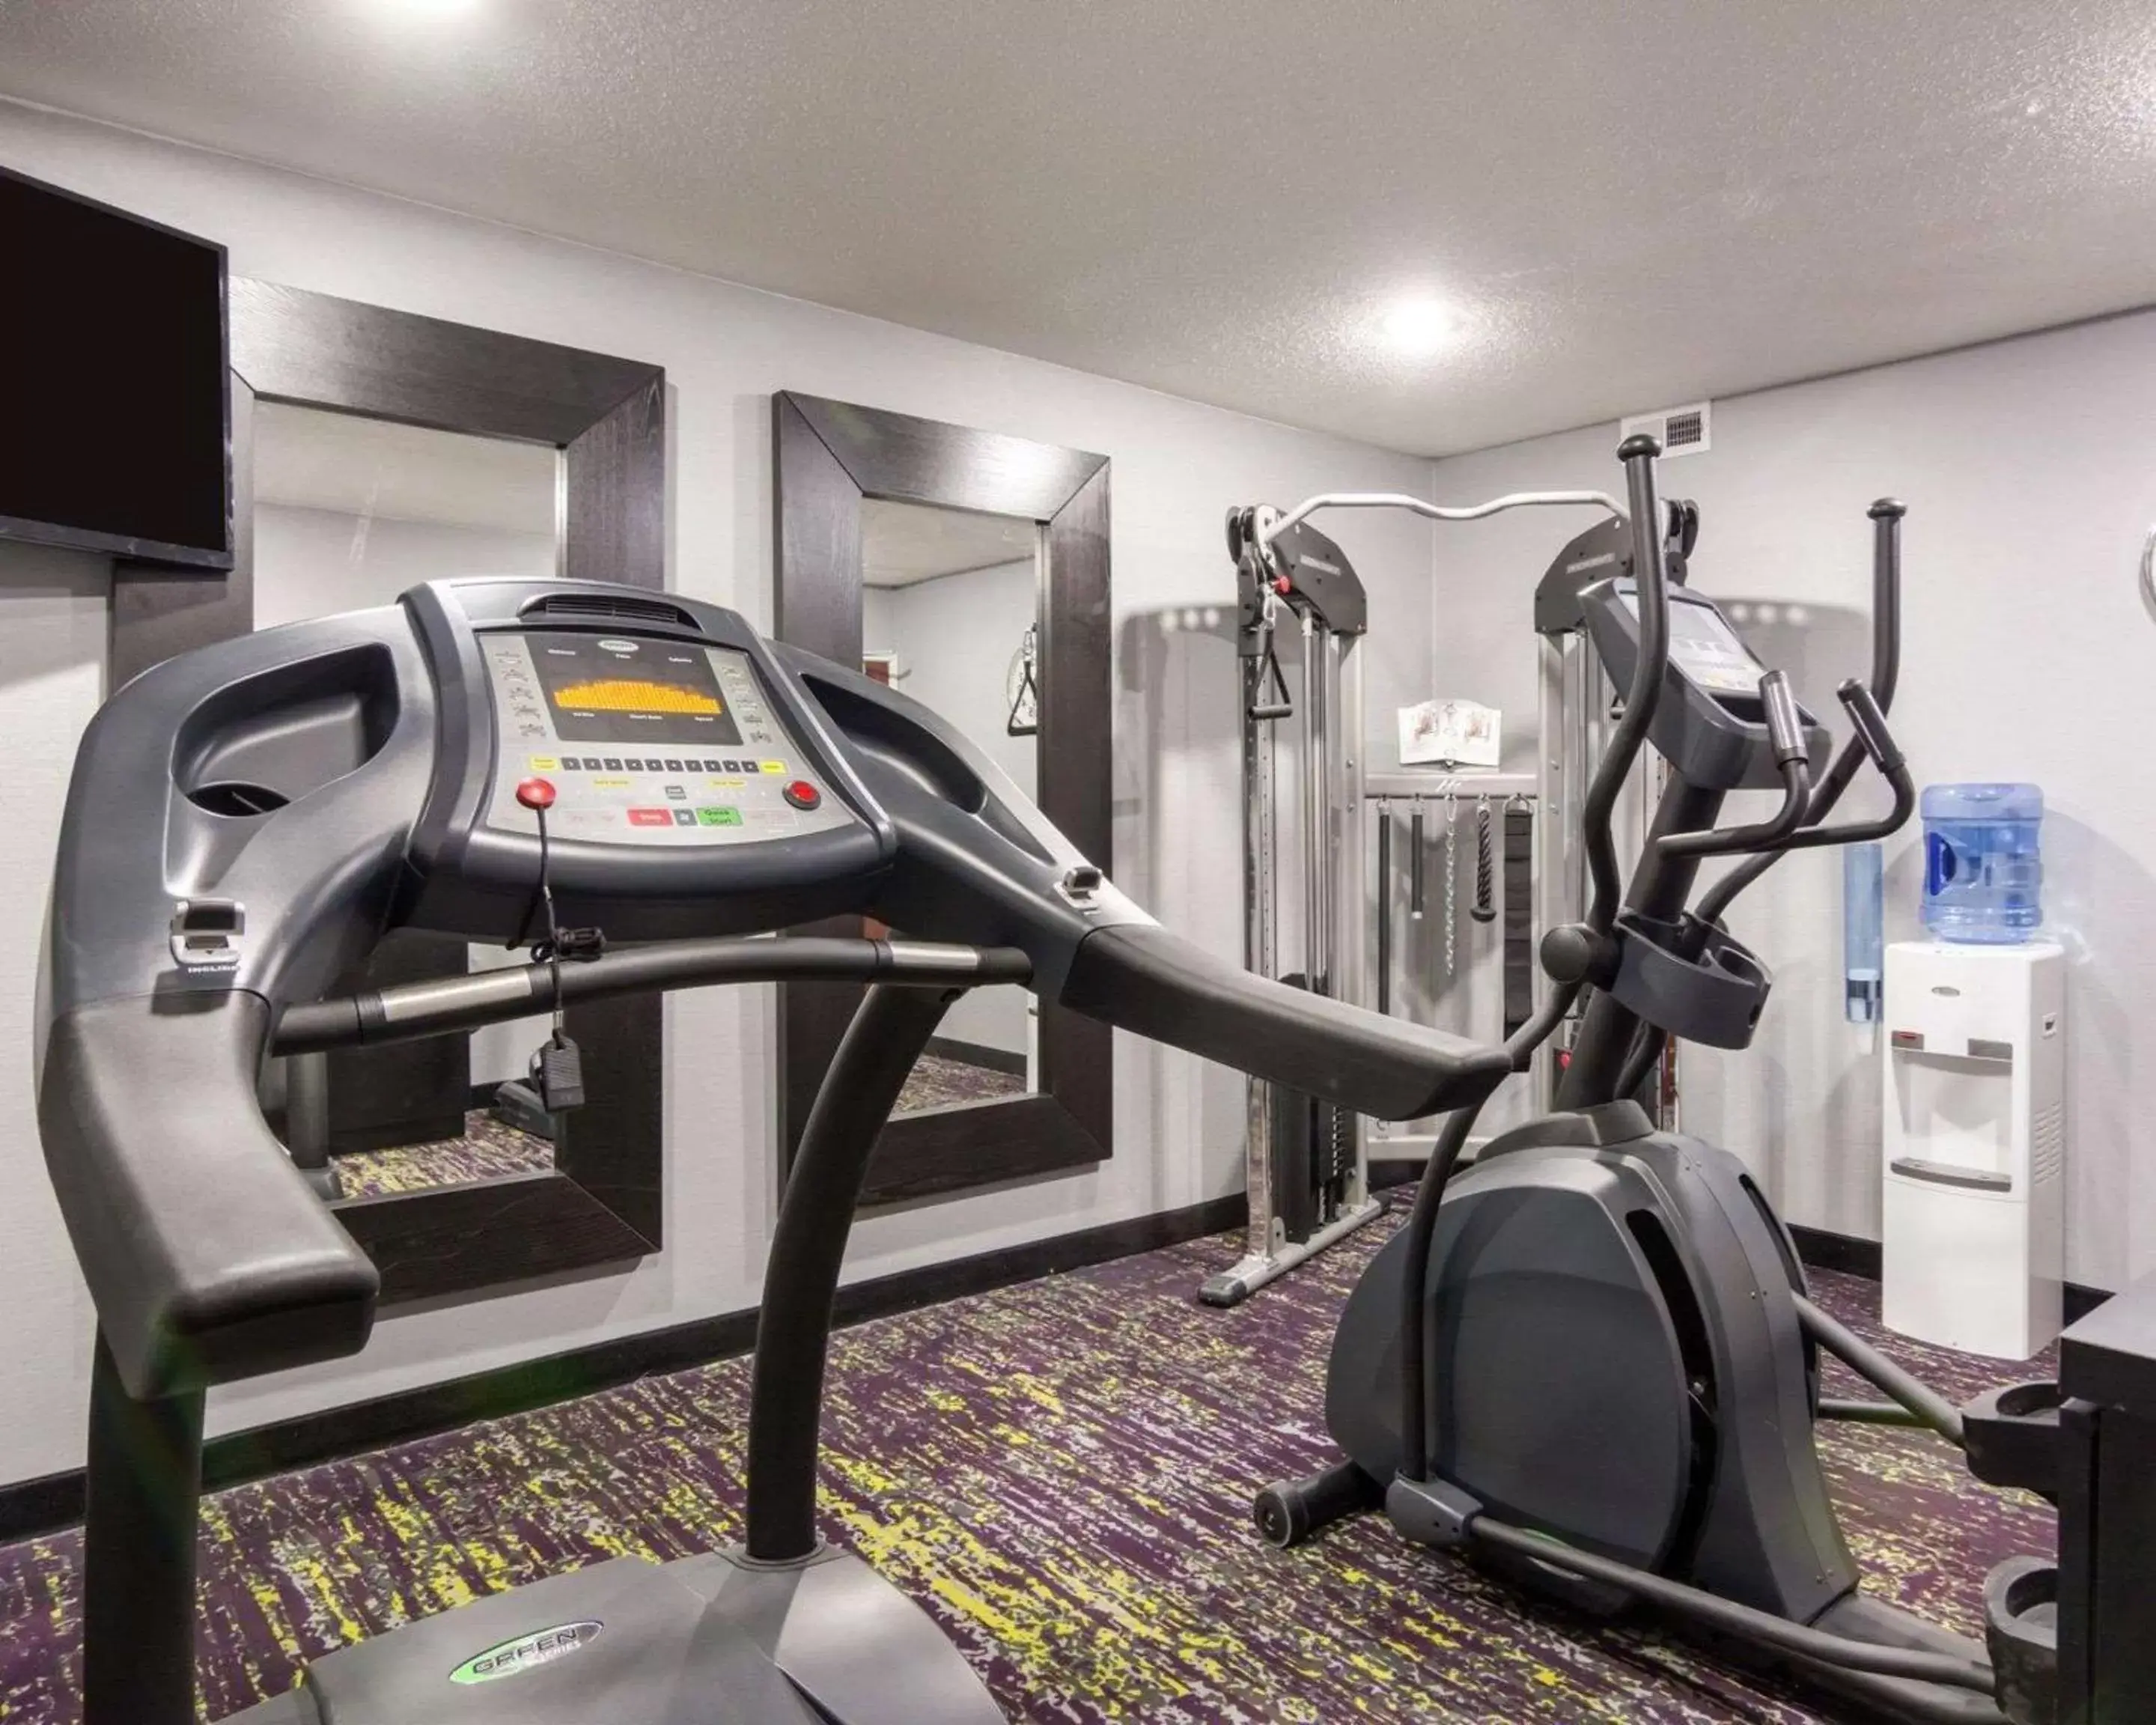 Fitness centre/facilities, Fitness Center/Facilities in Quality Inn & Suites Ashland near Kings Dominion